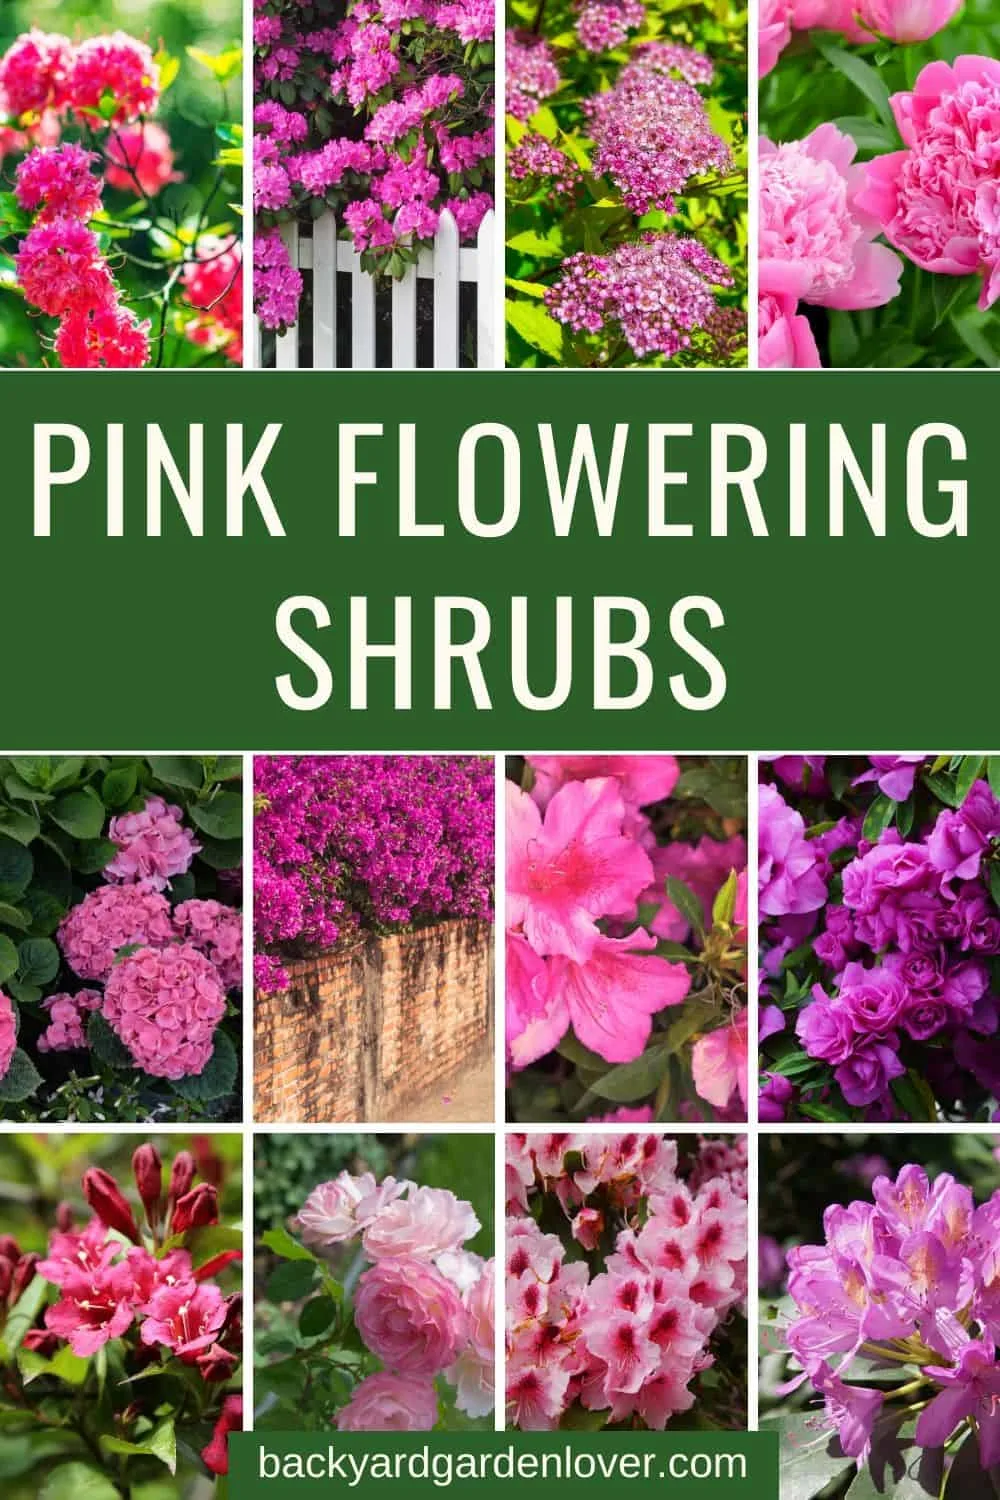 A collection of pink flowering shrubs